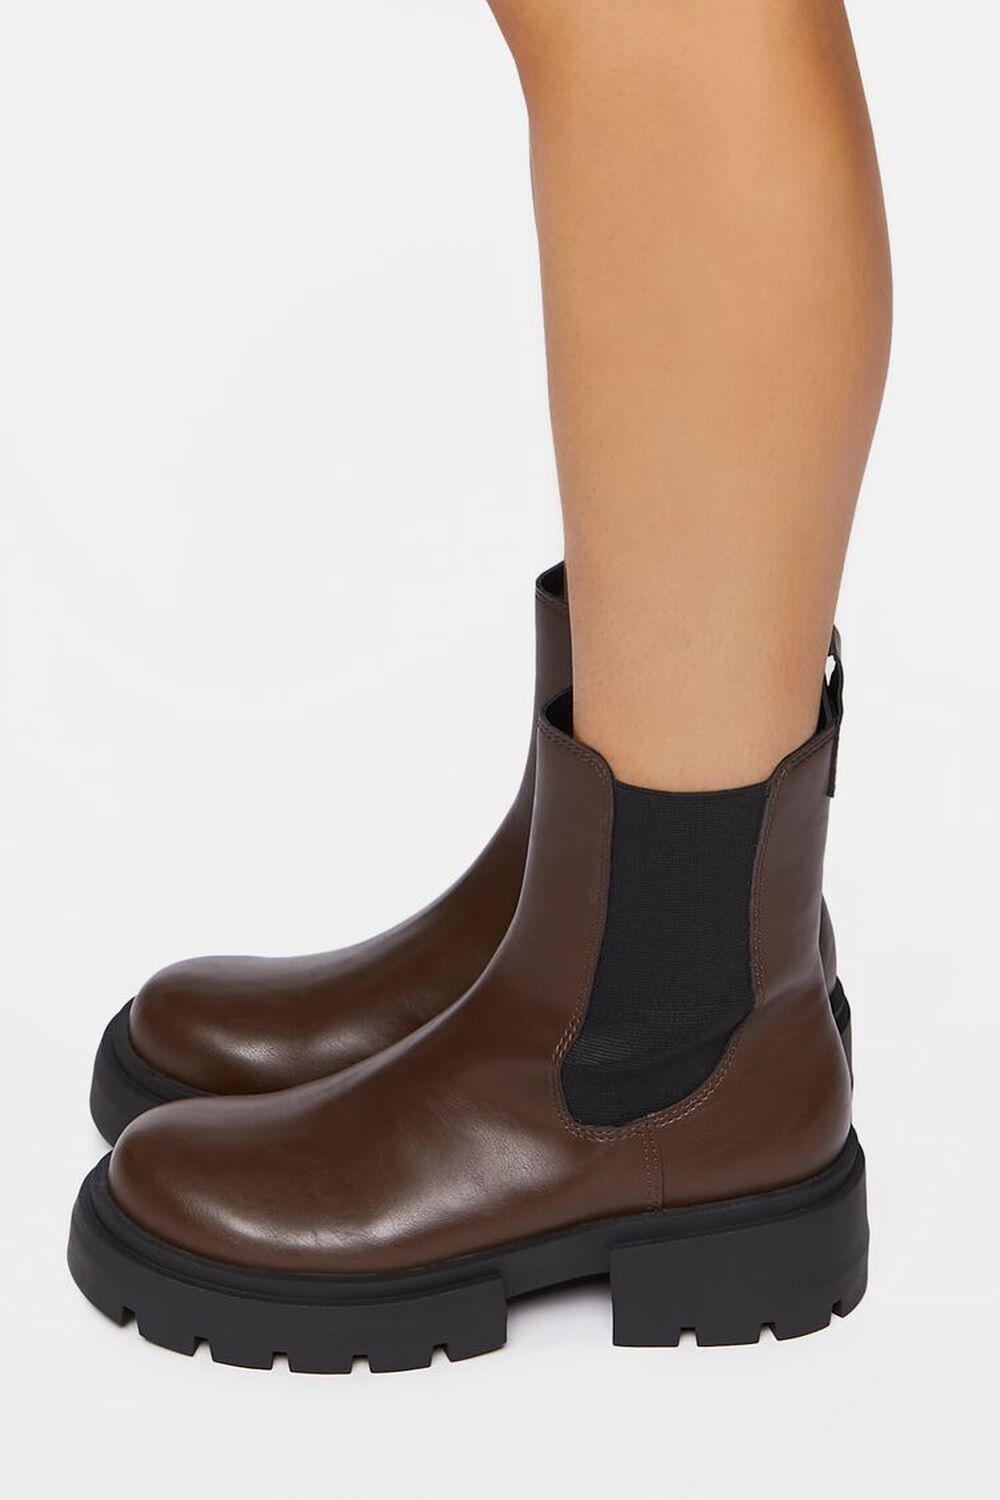 BROWN Faux Leather Chelsea Boots, image 2